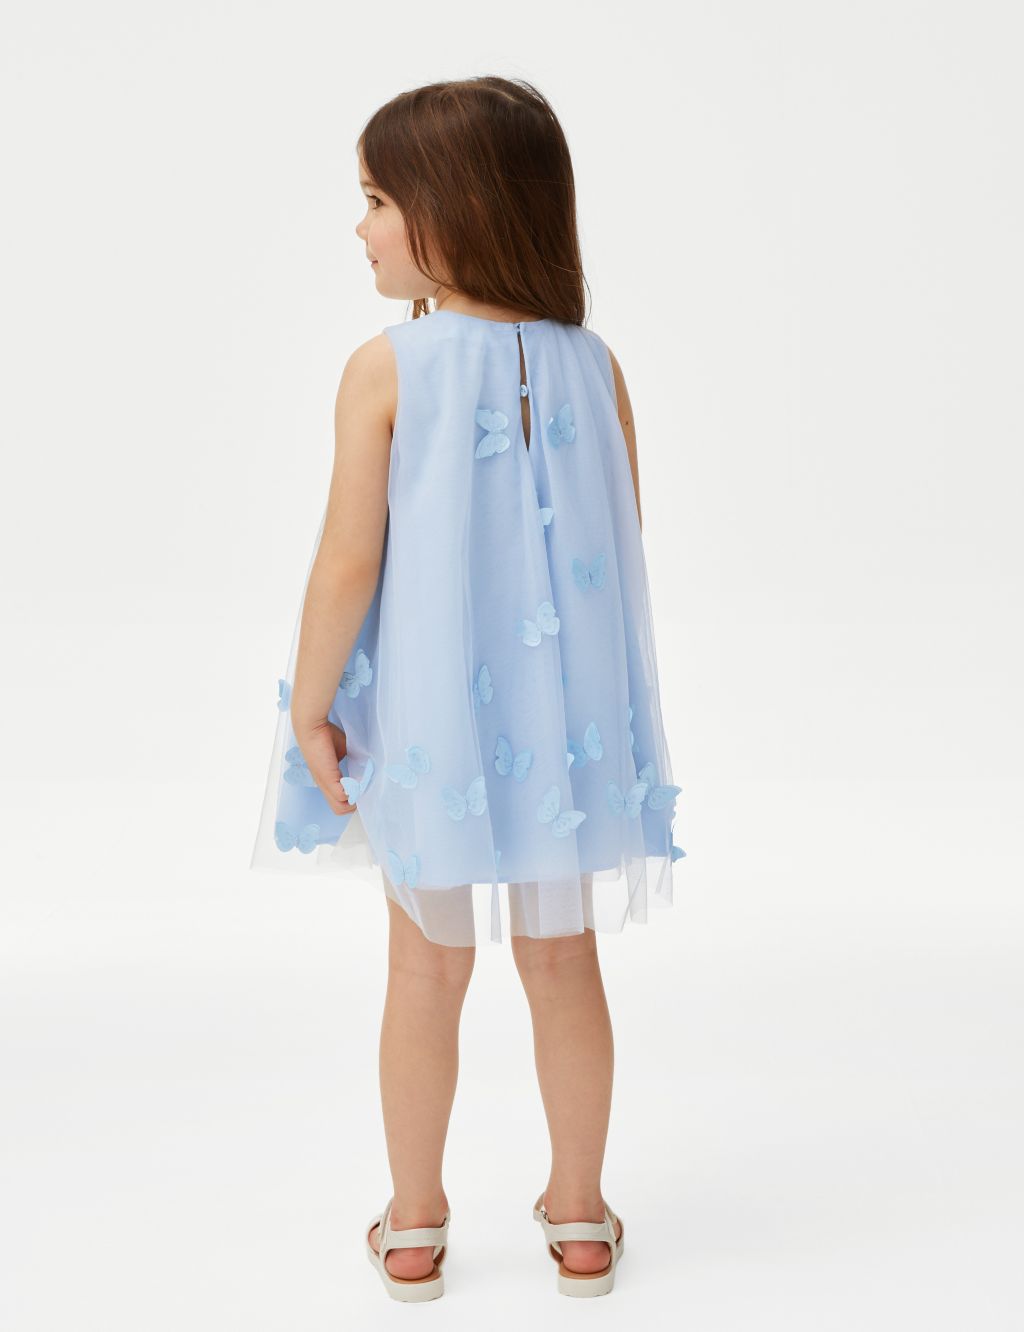 Butterfly Applique Dress (2-7 Years) image 4